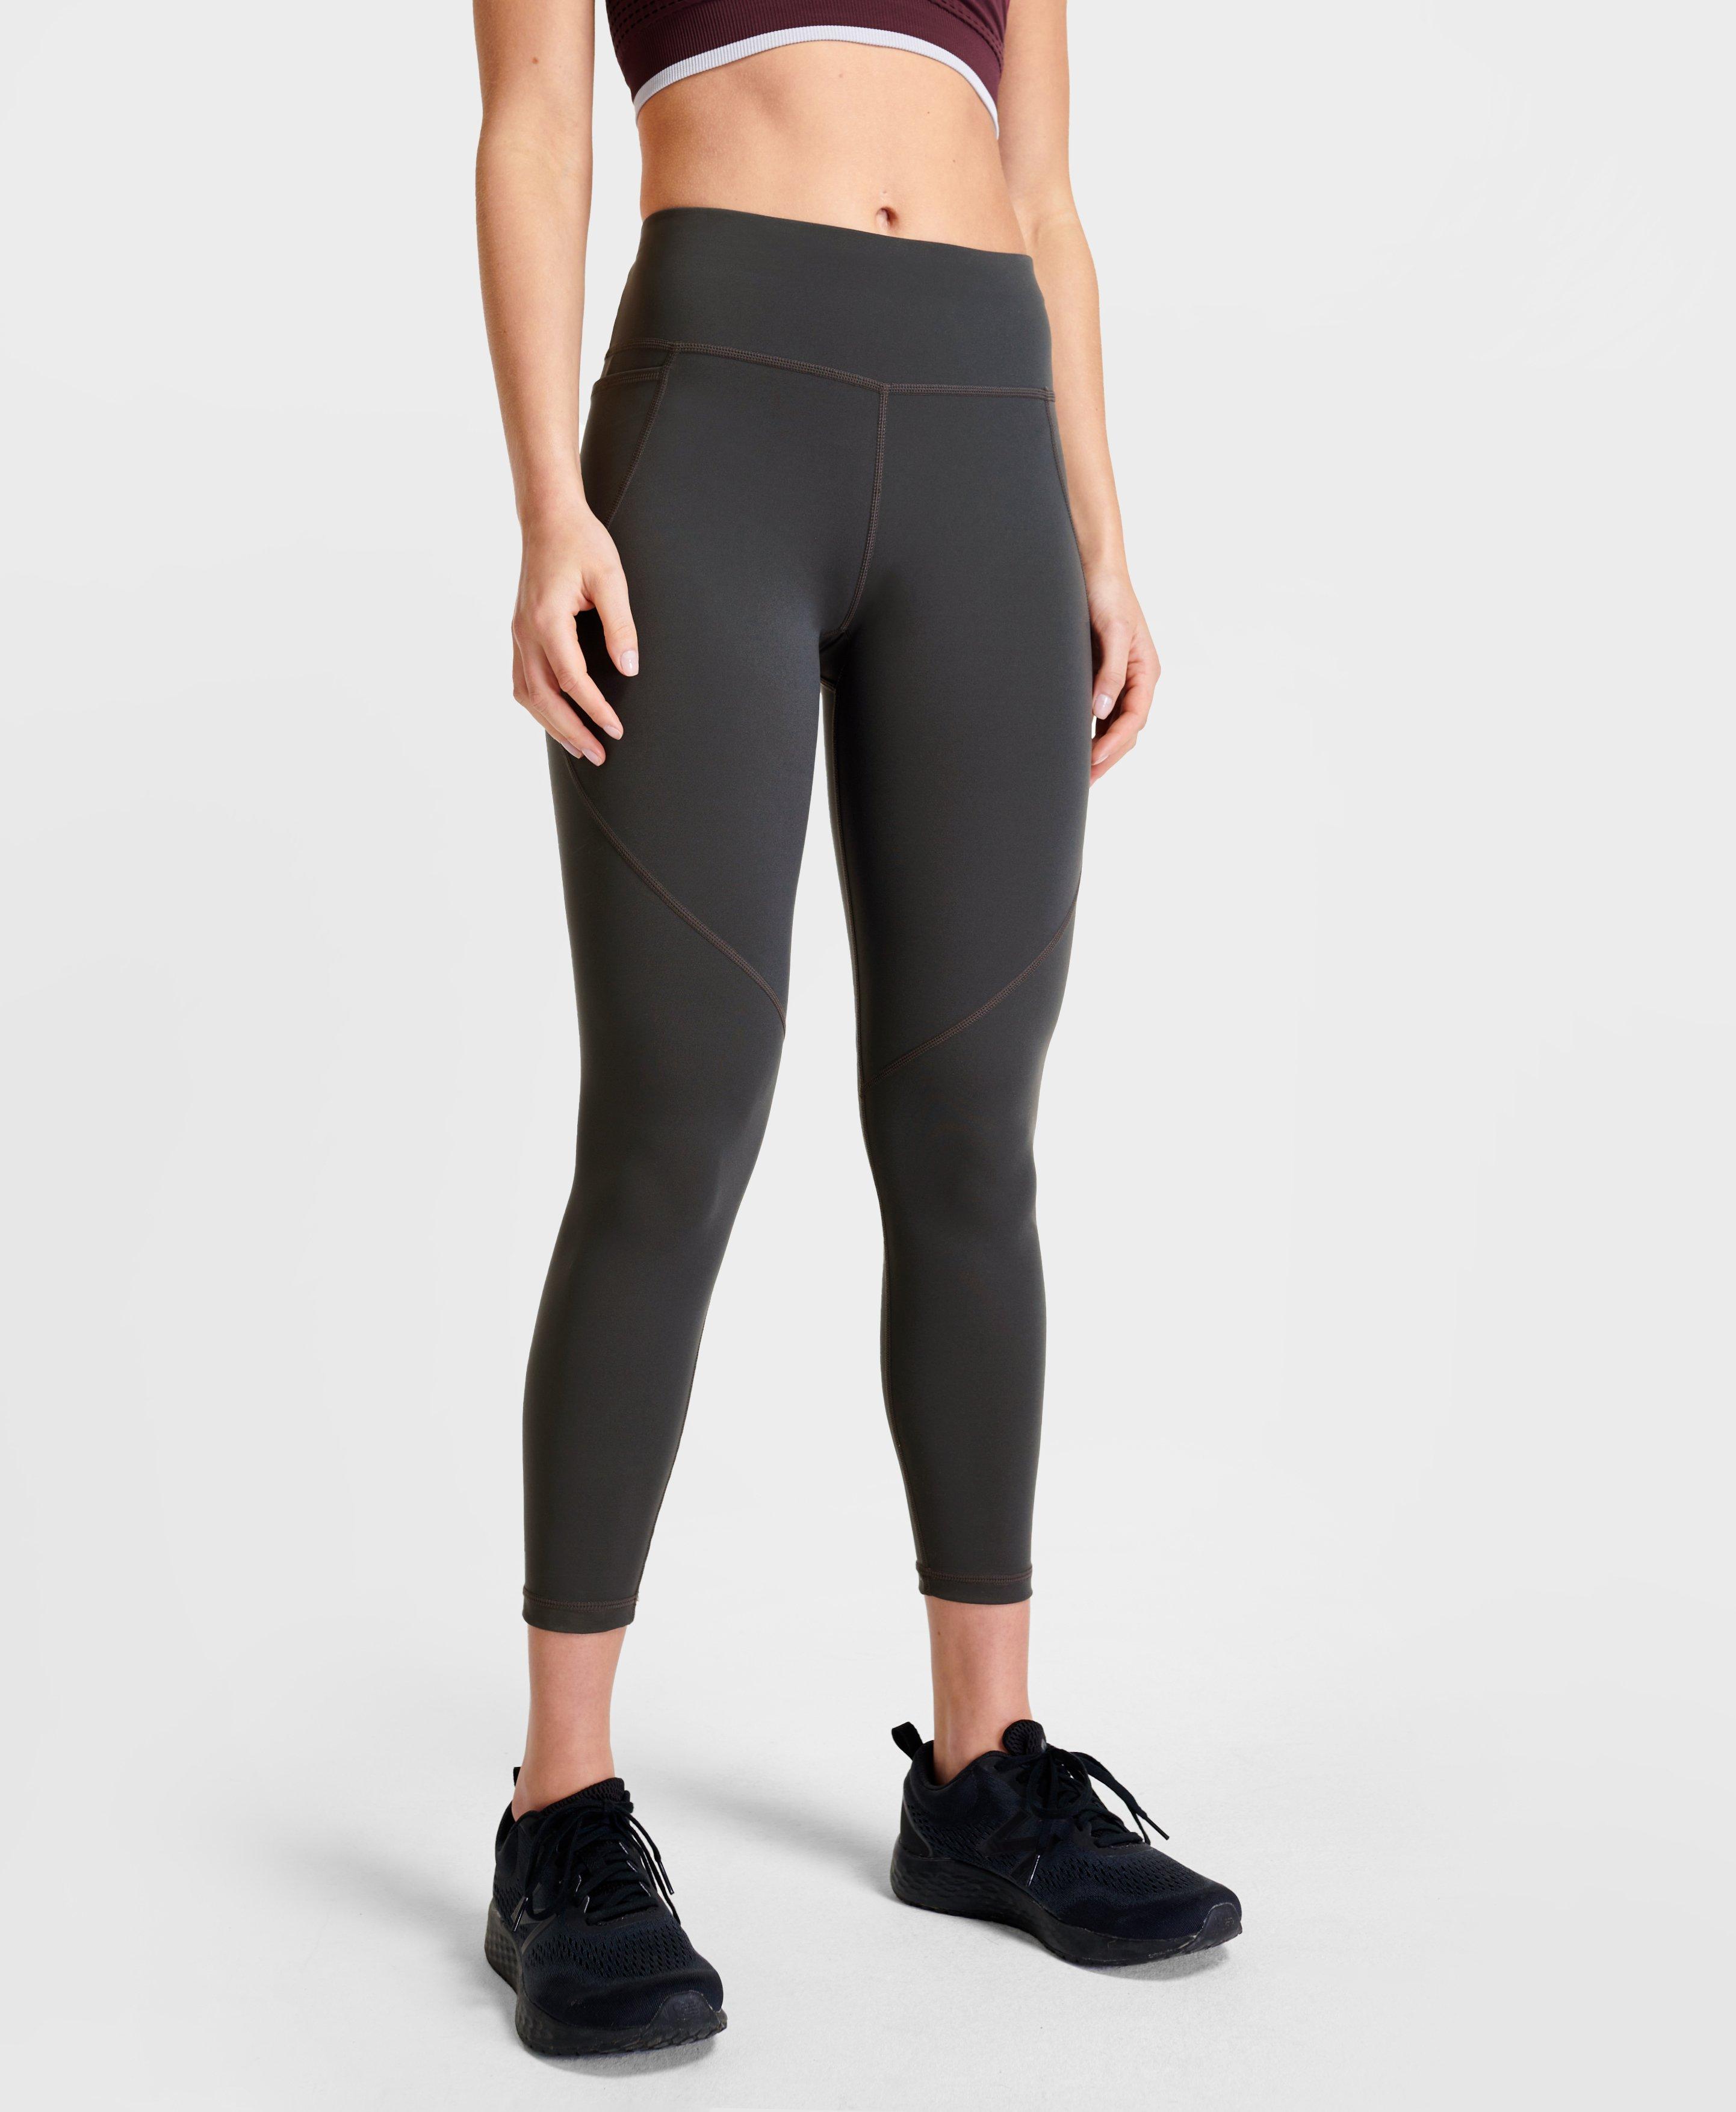 Best Gym Leggings That Don't Fall Down Uke  International Society of  Precision Agriculture